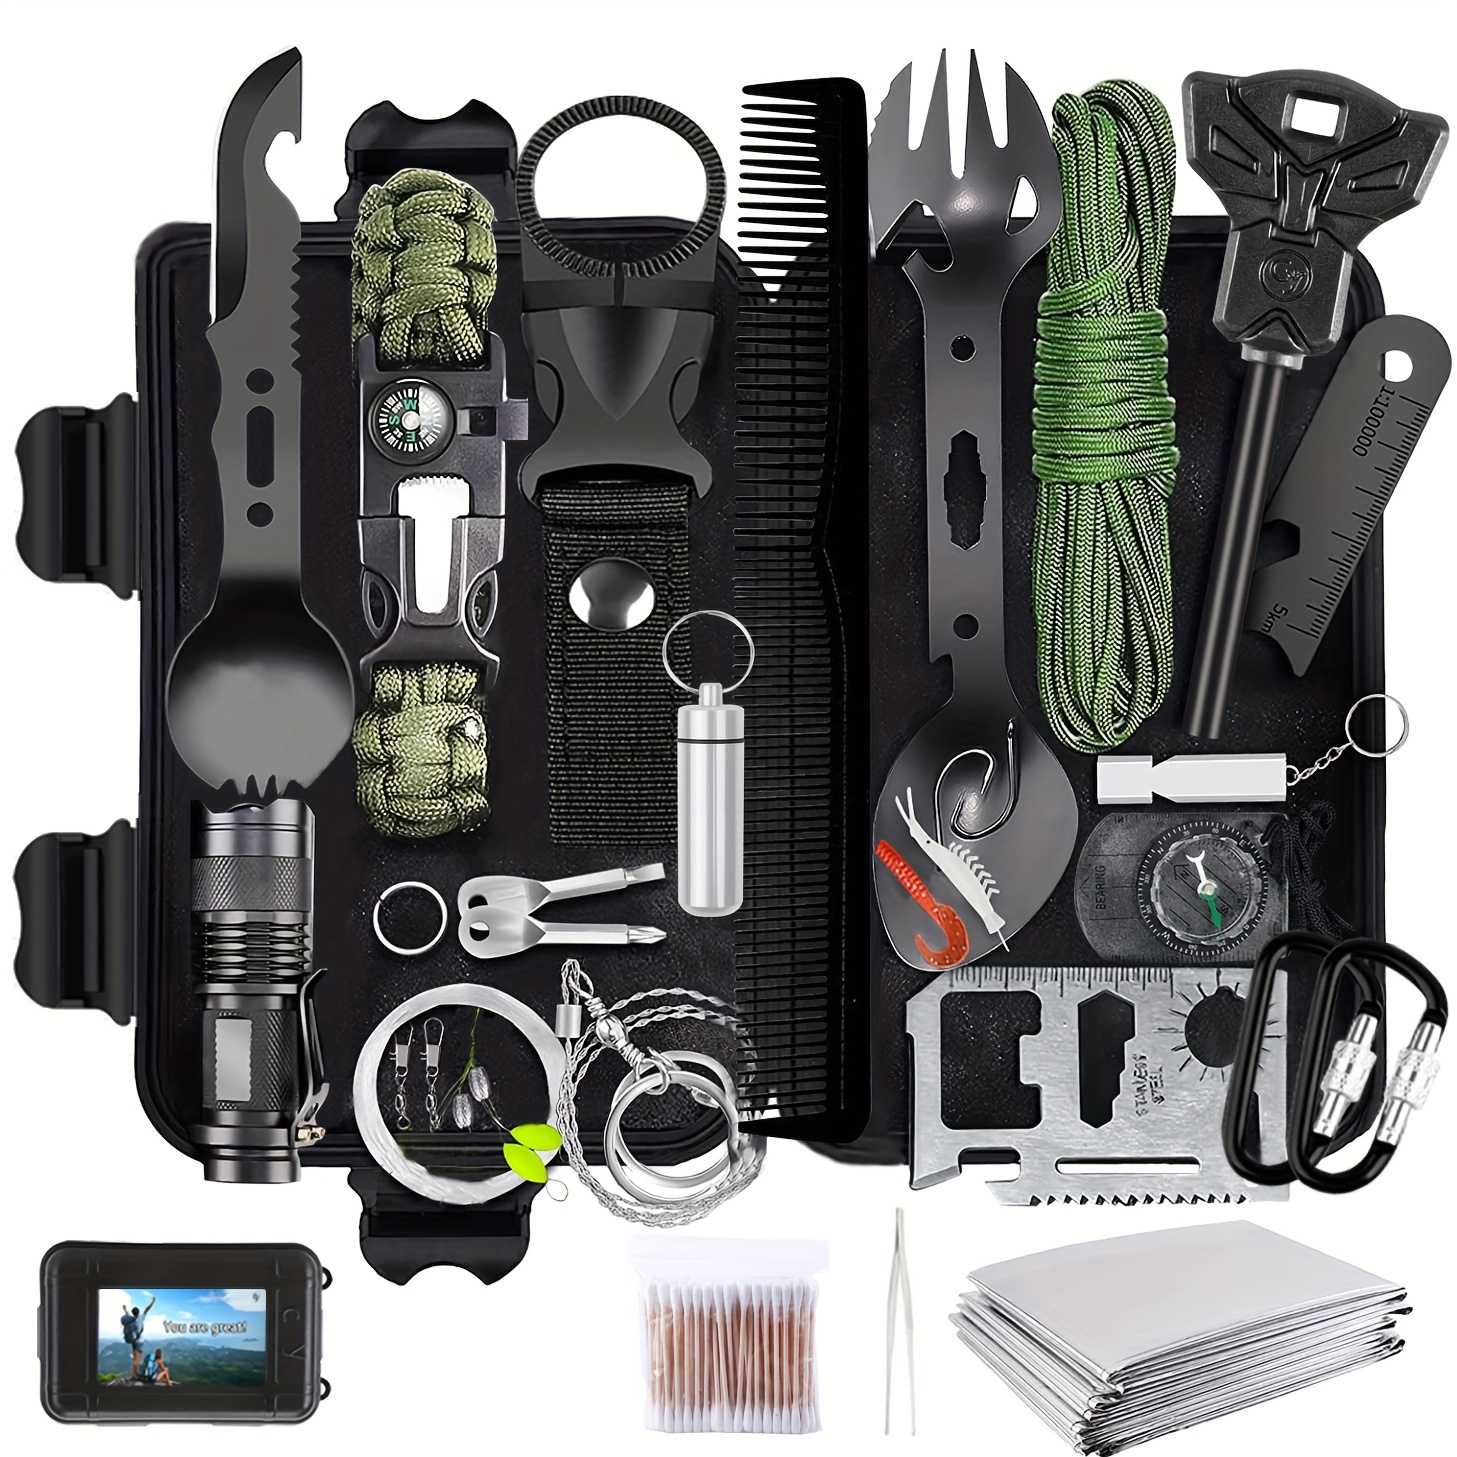 Pocket 30: Ultimate Tiny Survival Pocket Kit Bundle / 30 in 1 Ultralight EDC Wilderness, Travel, Camping, Hiking, Car, First Aid, Tactical, Emergency